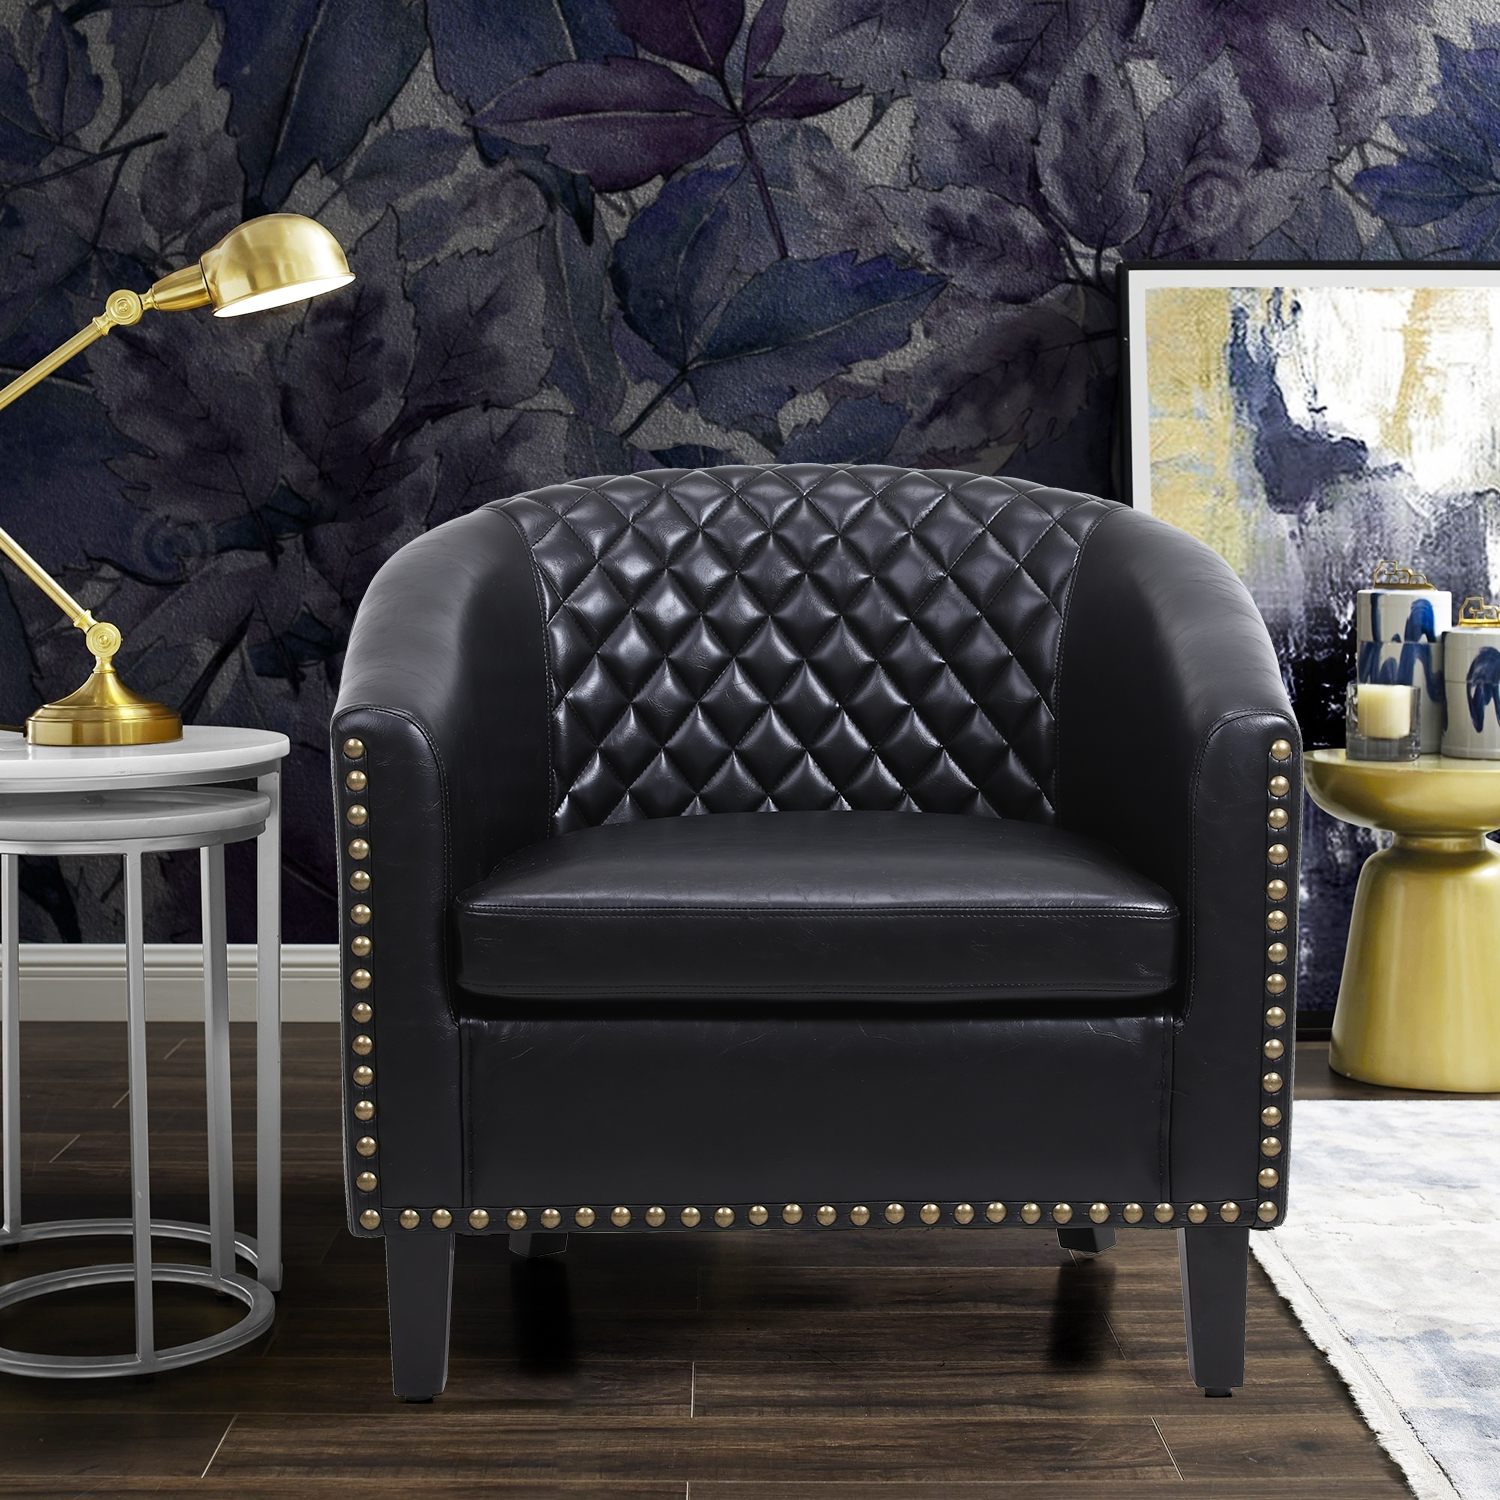 Modern Barrel Chair Tub Chair Faux Leather Club Chair with Arms and Nailheads, Upholstered Barrel Accent Chair for Living Room Bedroom - Black - image 2 of 8